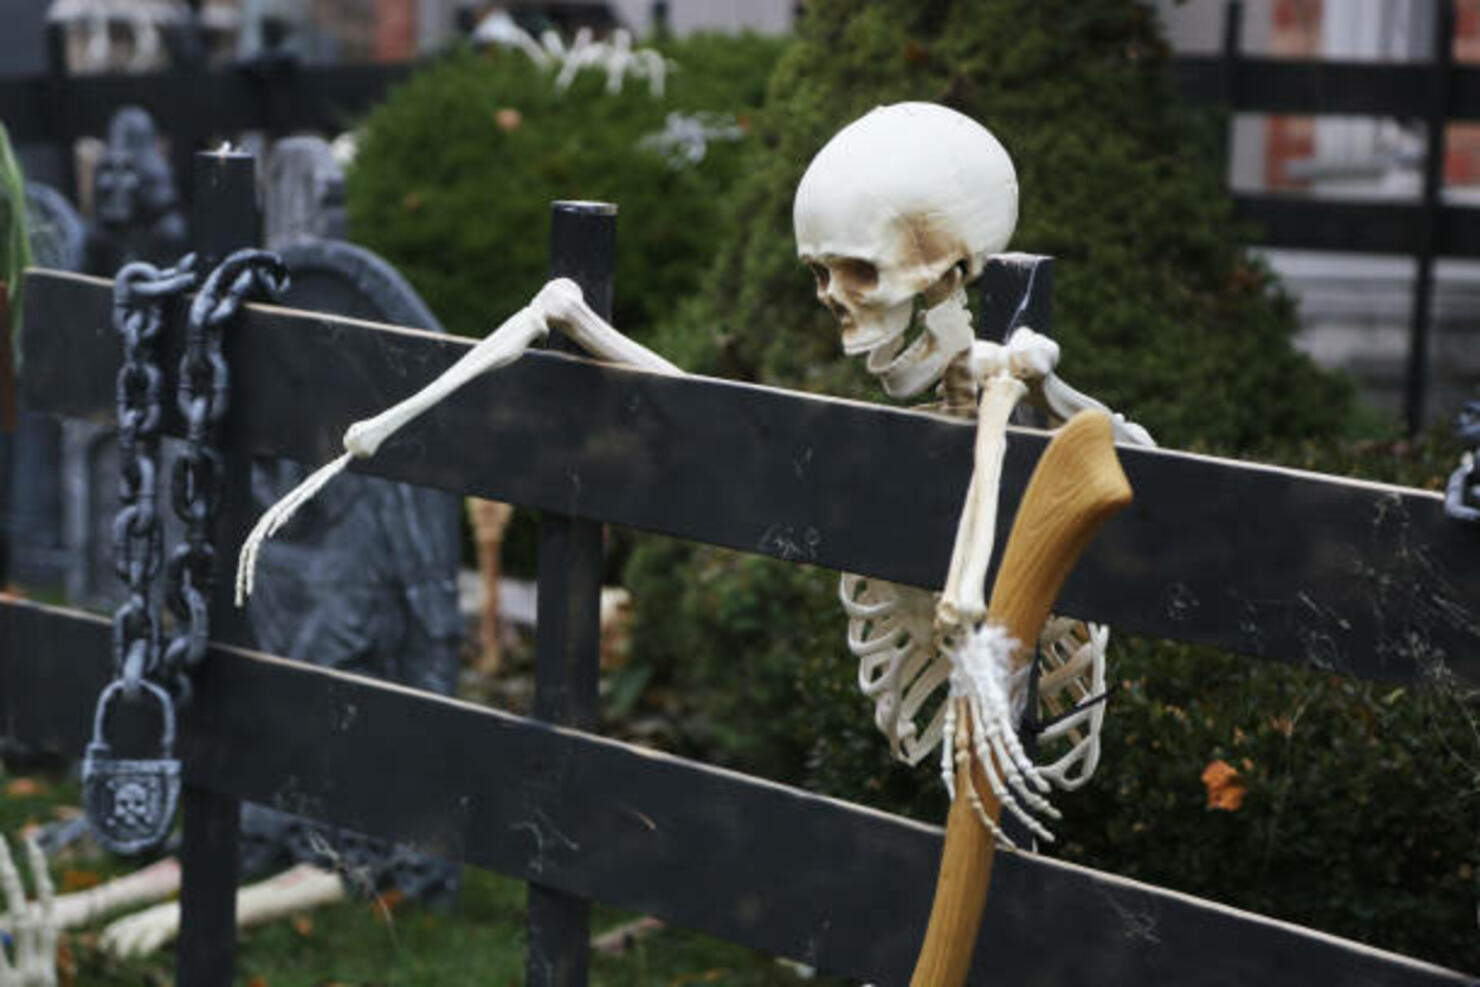 12 Foot Home Depot Skeleton Will Return This Year With A Friend Iheartradio